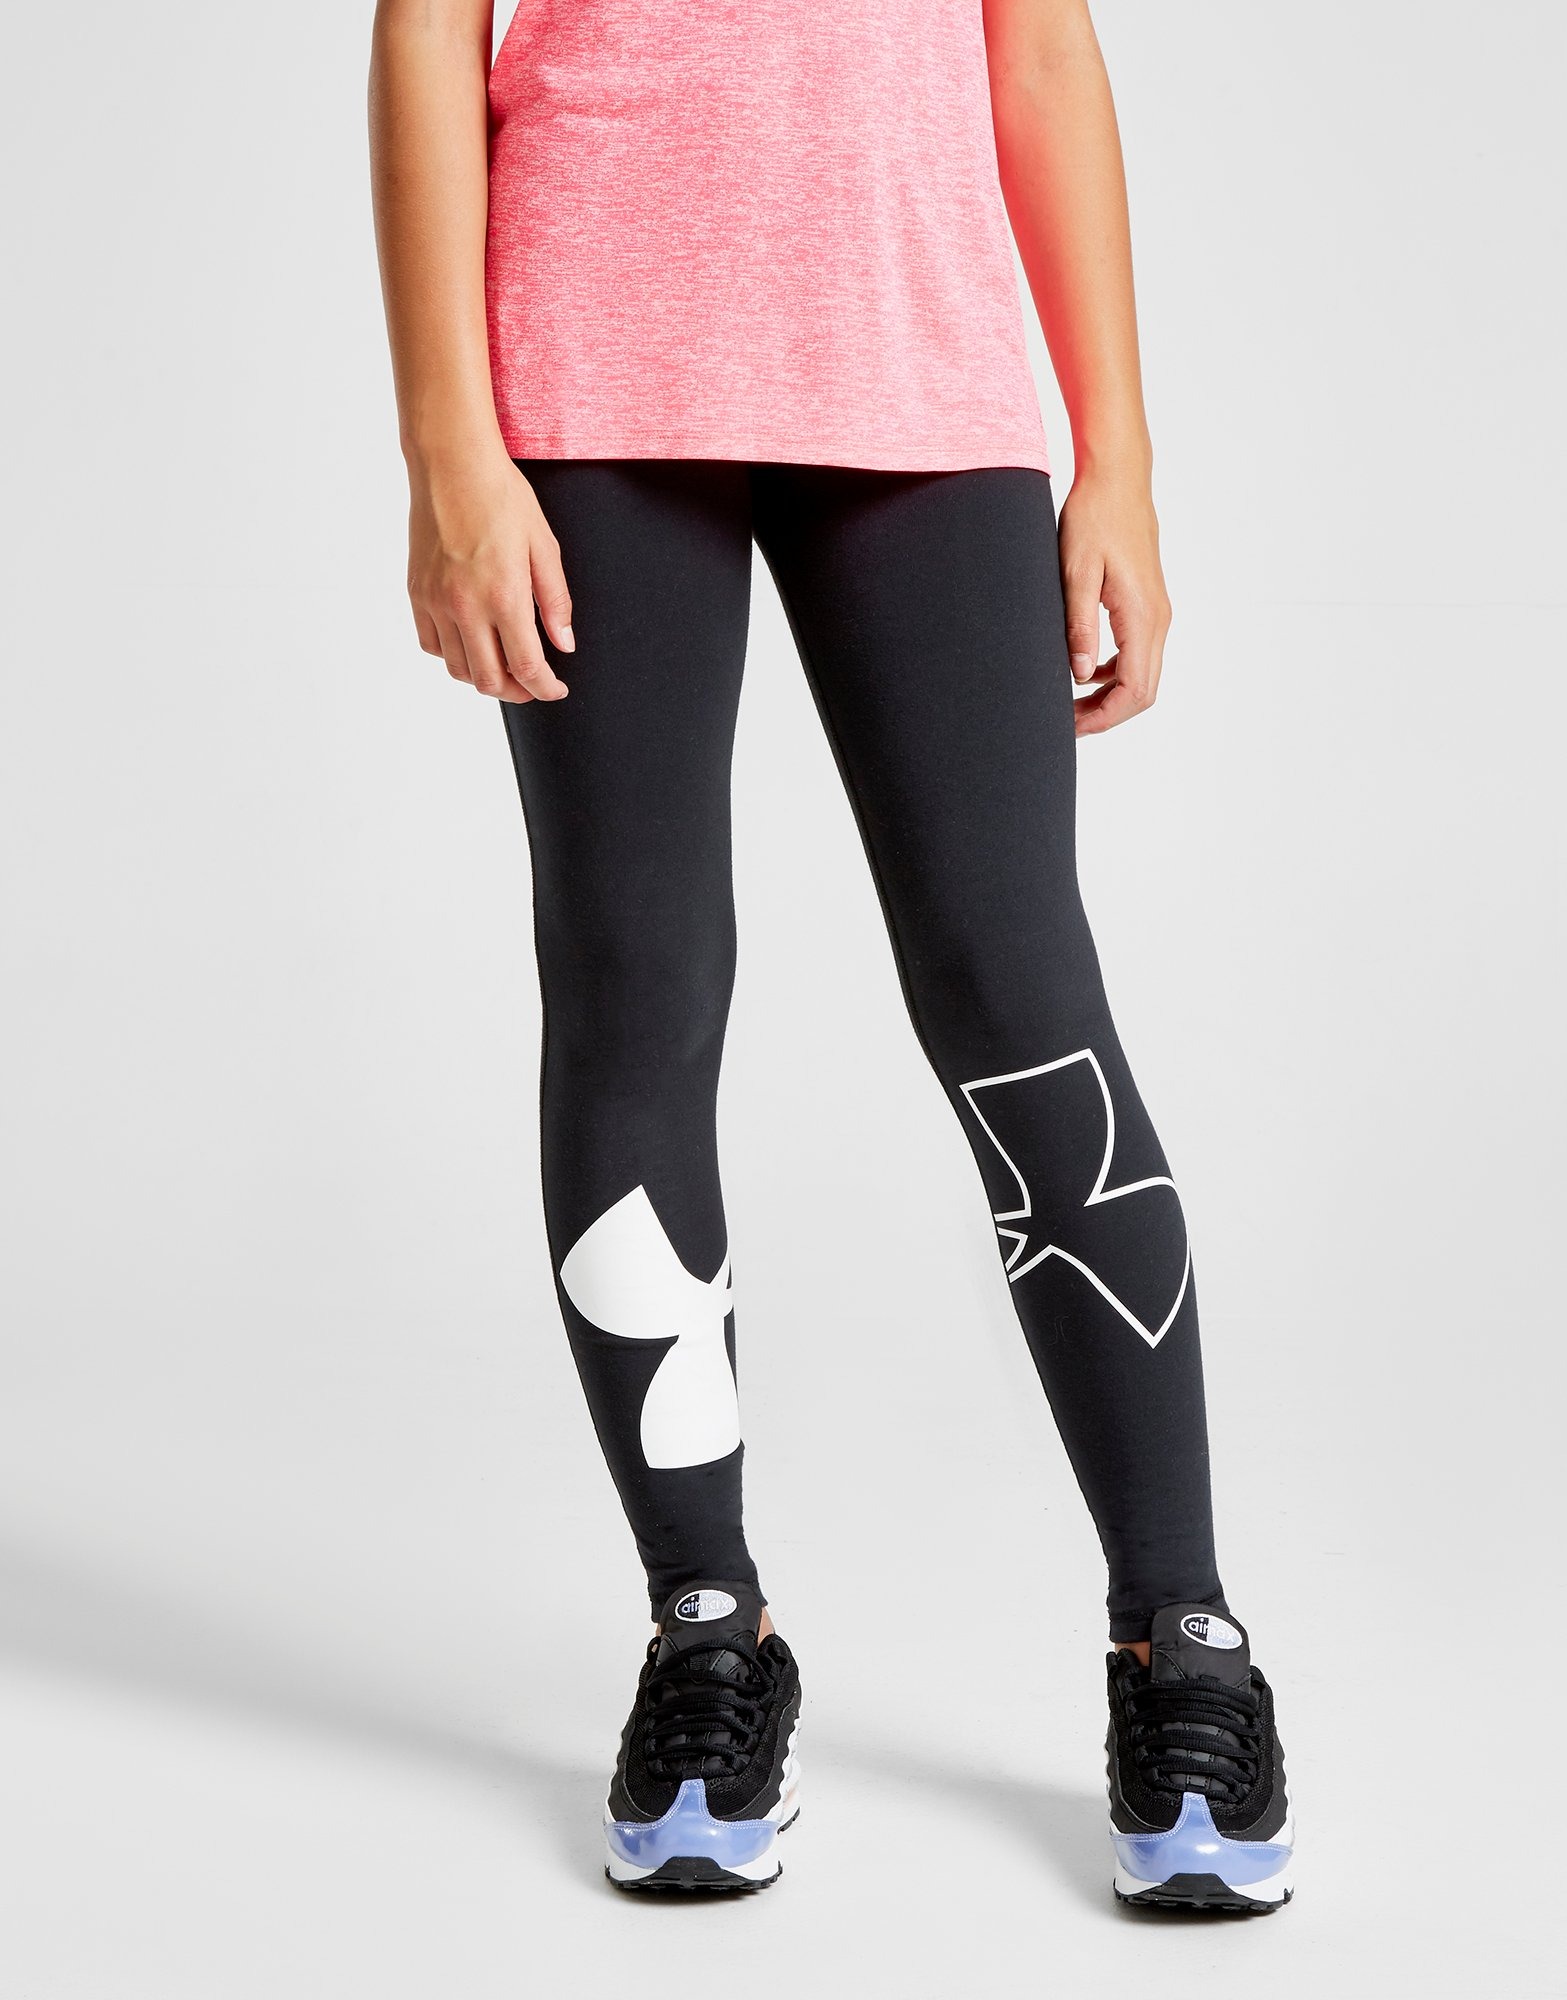 Under Armour Leggings Girls Size YMD Black Style 1332717